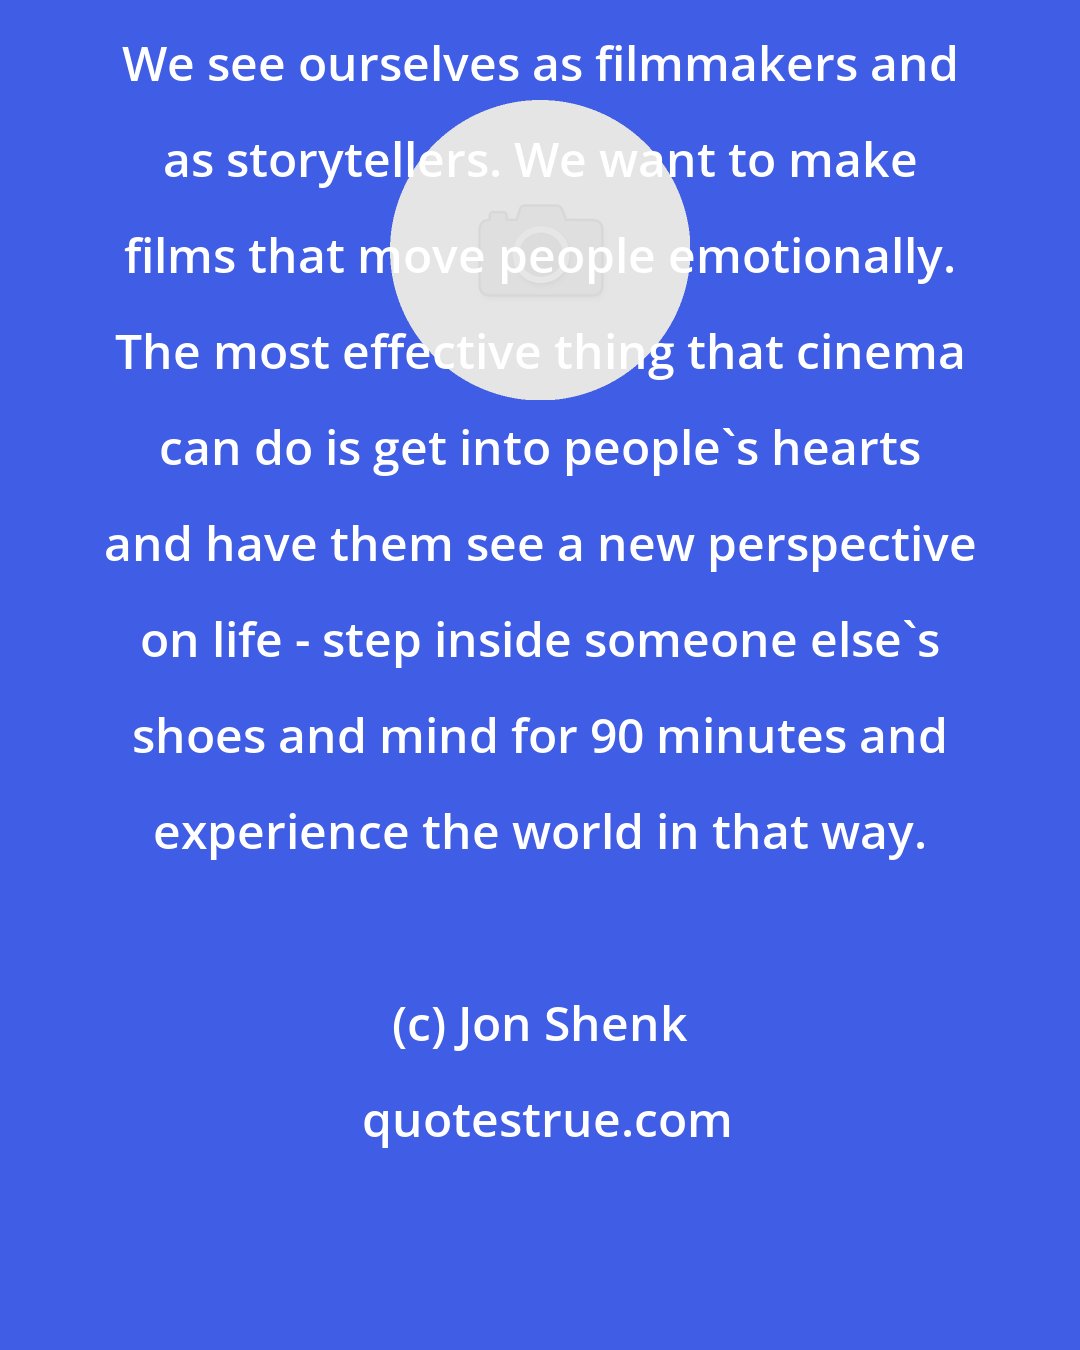 Jon Shenk: We see ourselves as filmmakers and as storytellers. We want to make films that move people emotionally. The most effective thing that cinema can do is get into people's hearts and have them see a new perspective on life - step inside someone else's shoes and mind for 90 minutes and experience the world in that way.